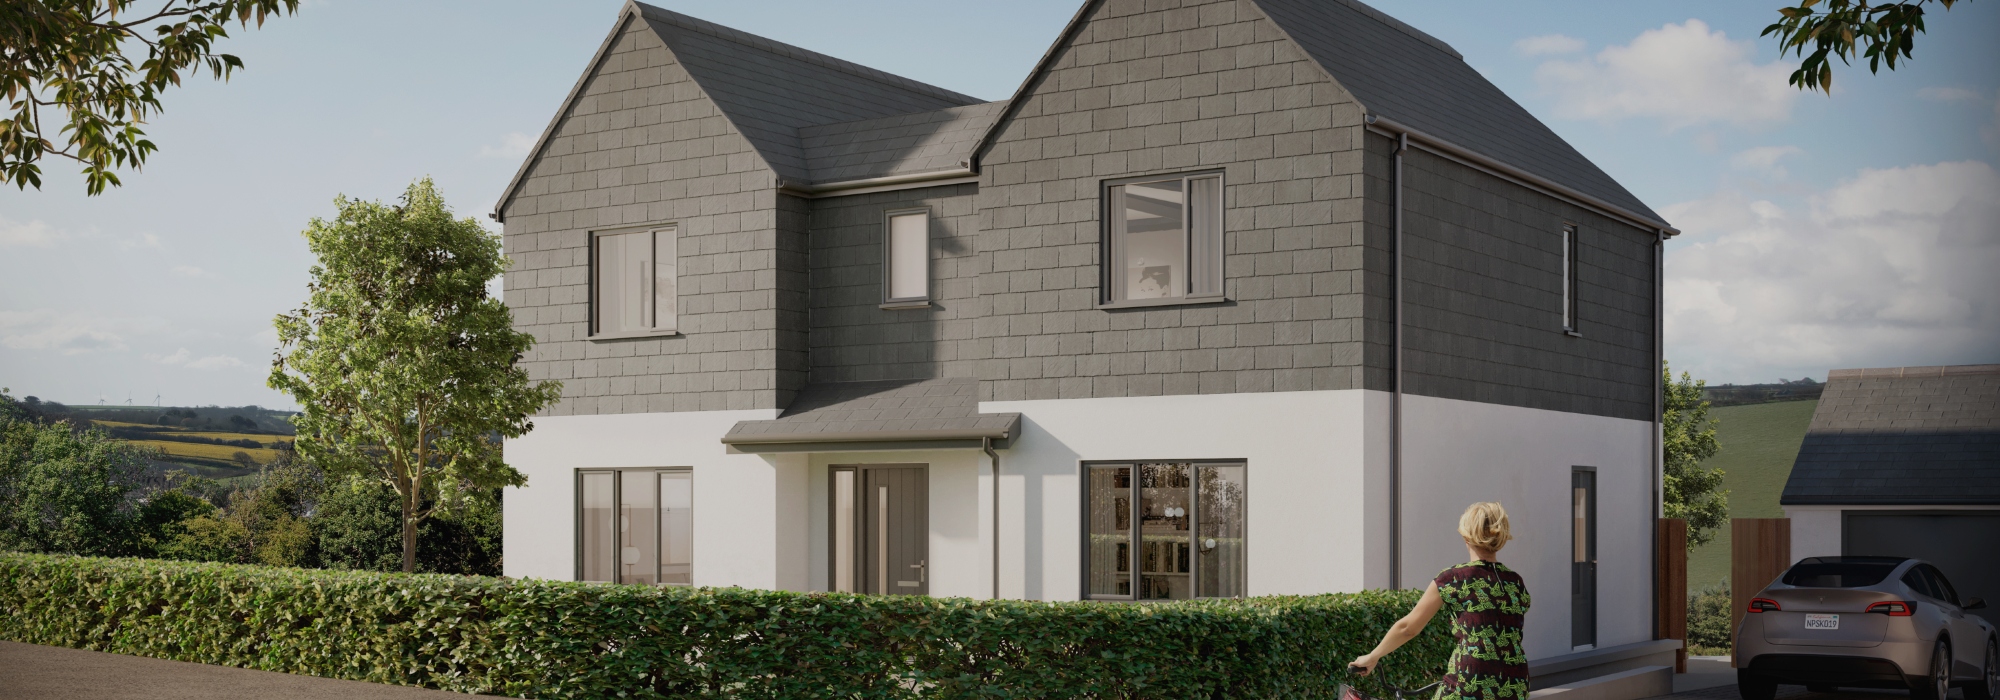 5 Bedroom Homes at Pentire Green